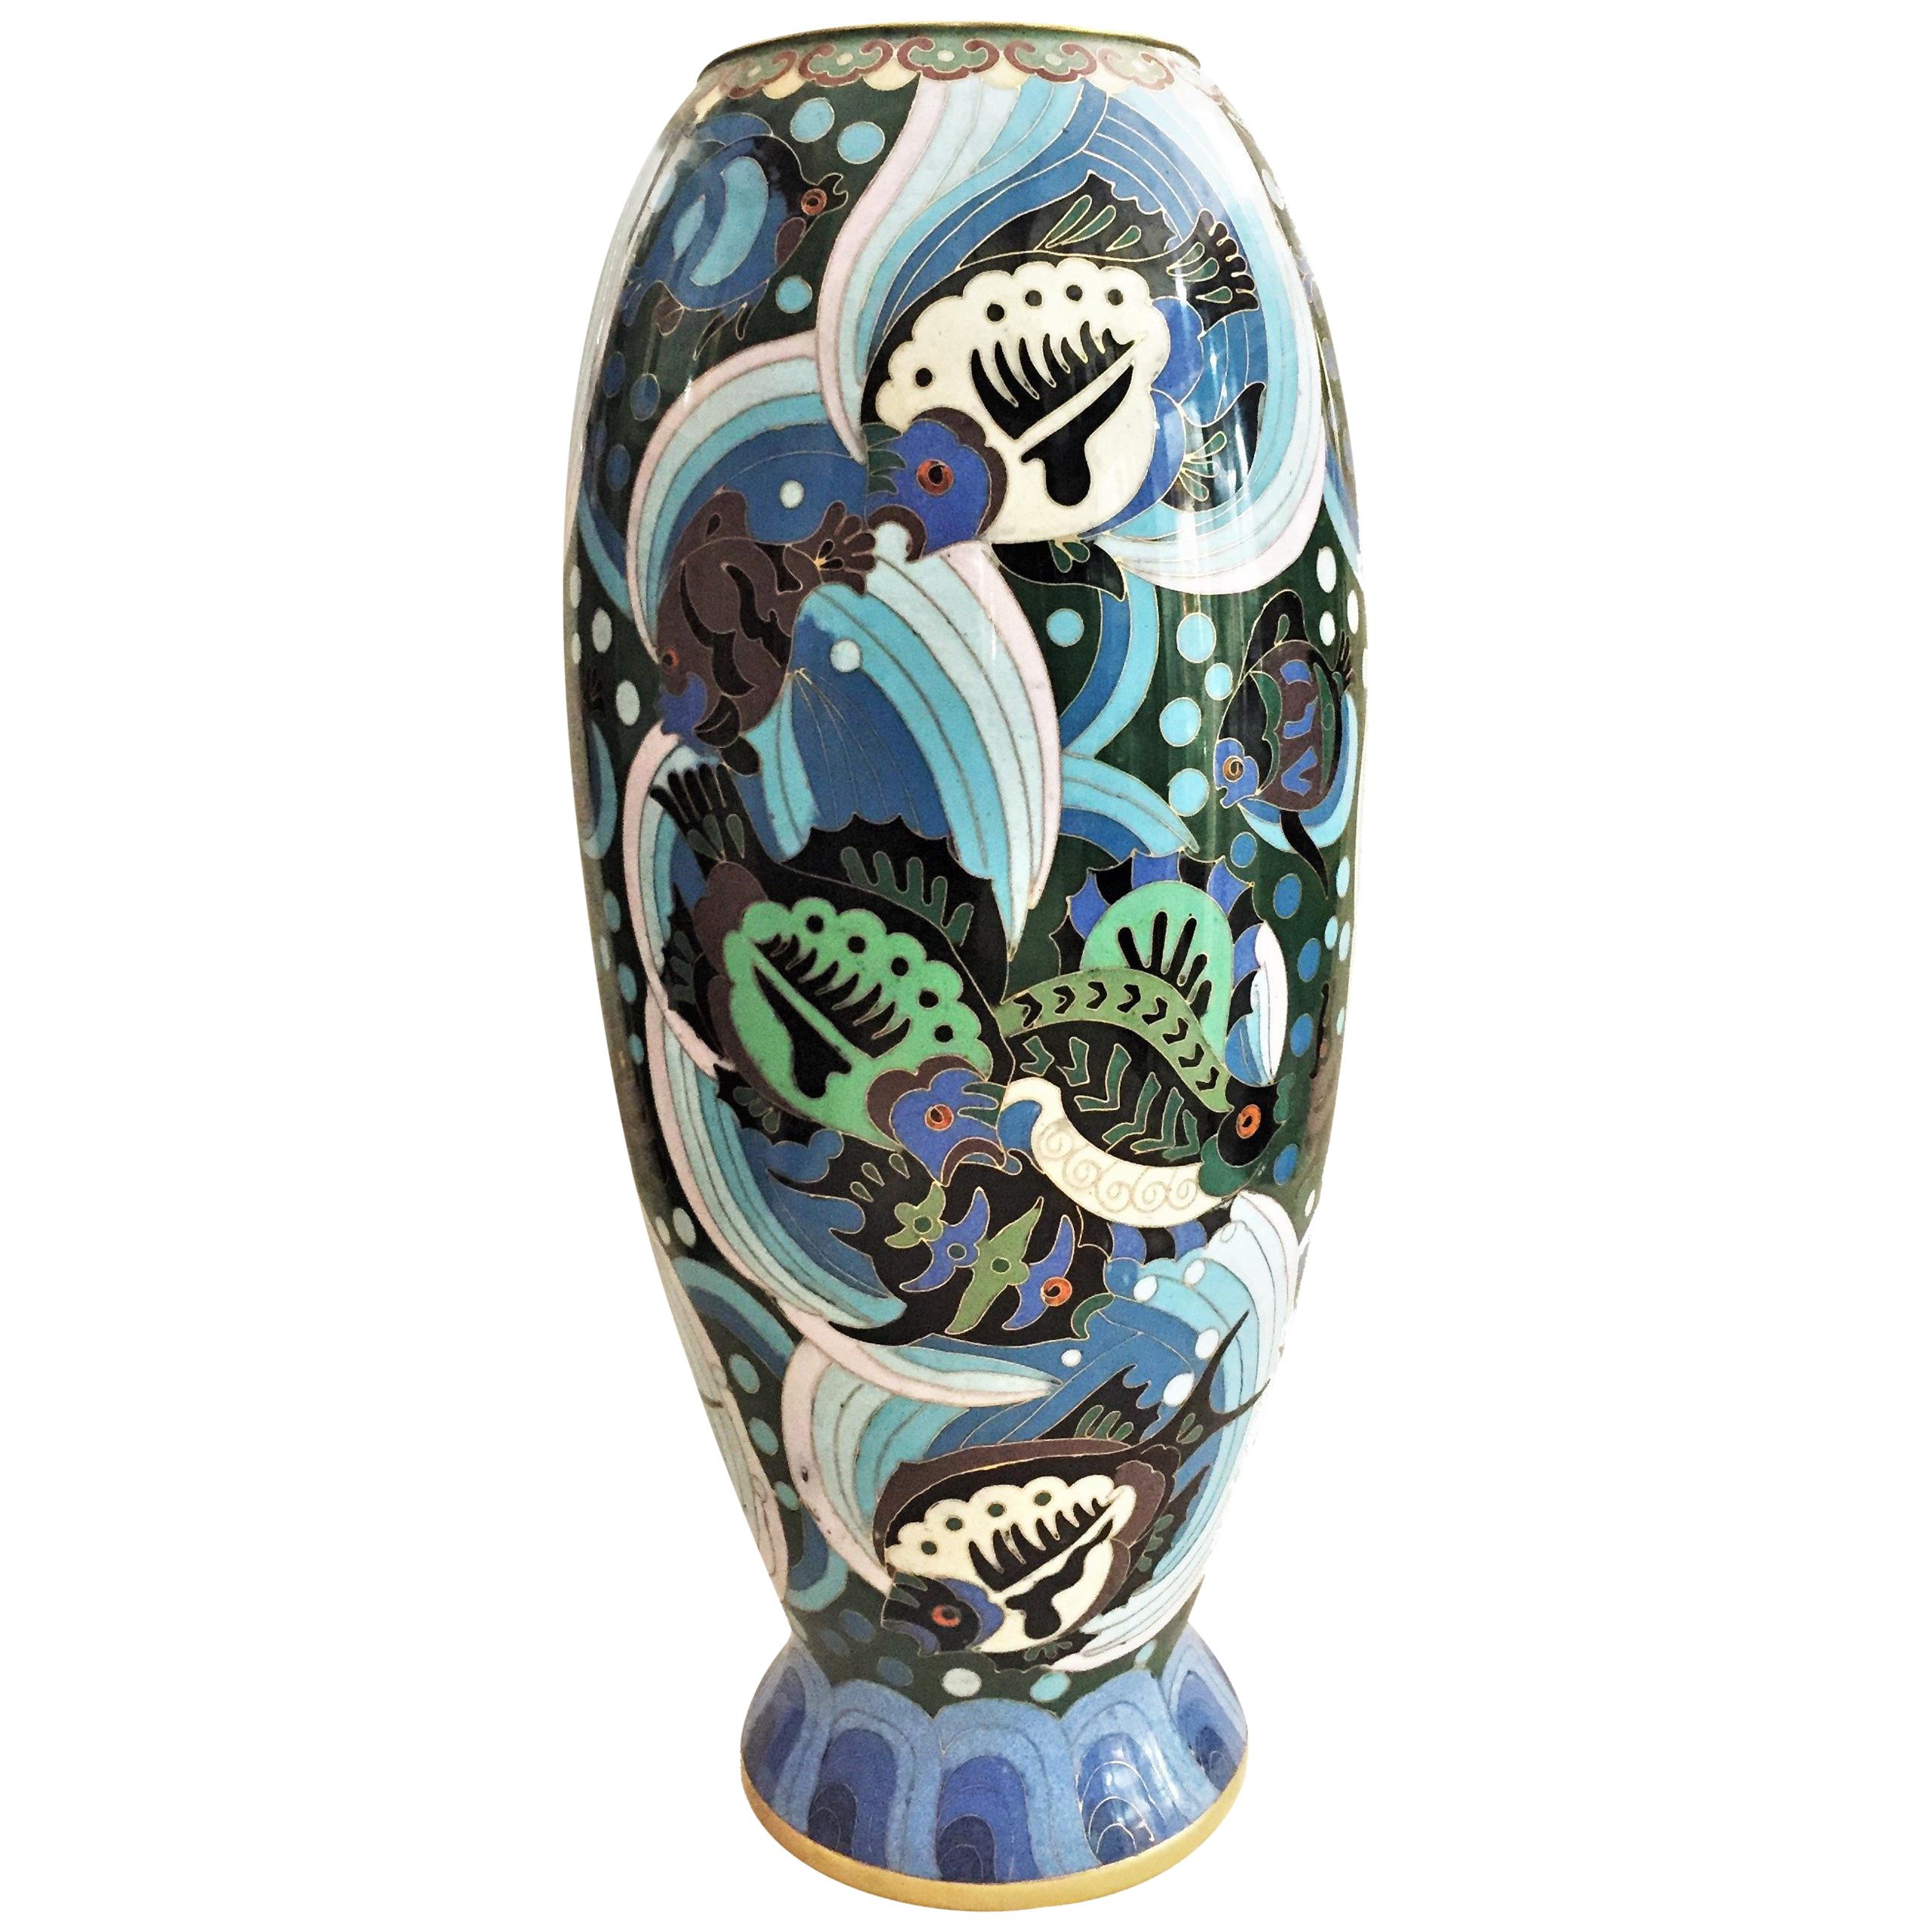 French Art Deco Cloisonné Enamel Vase with Fish and Sea Horses, circa 1920s